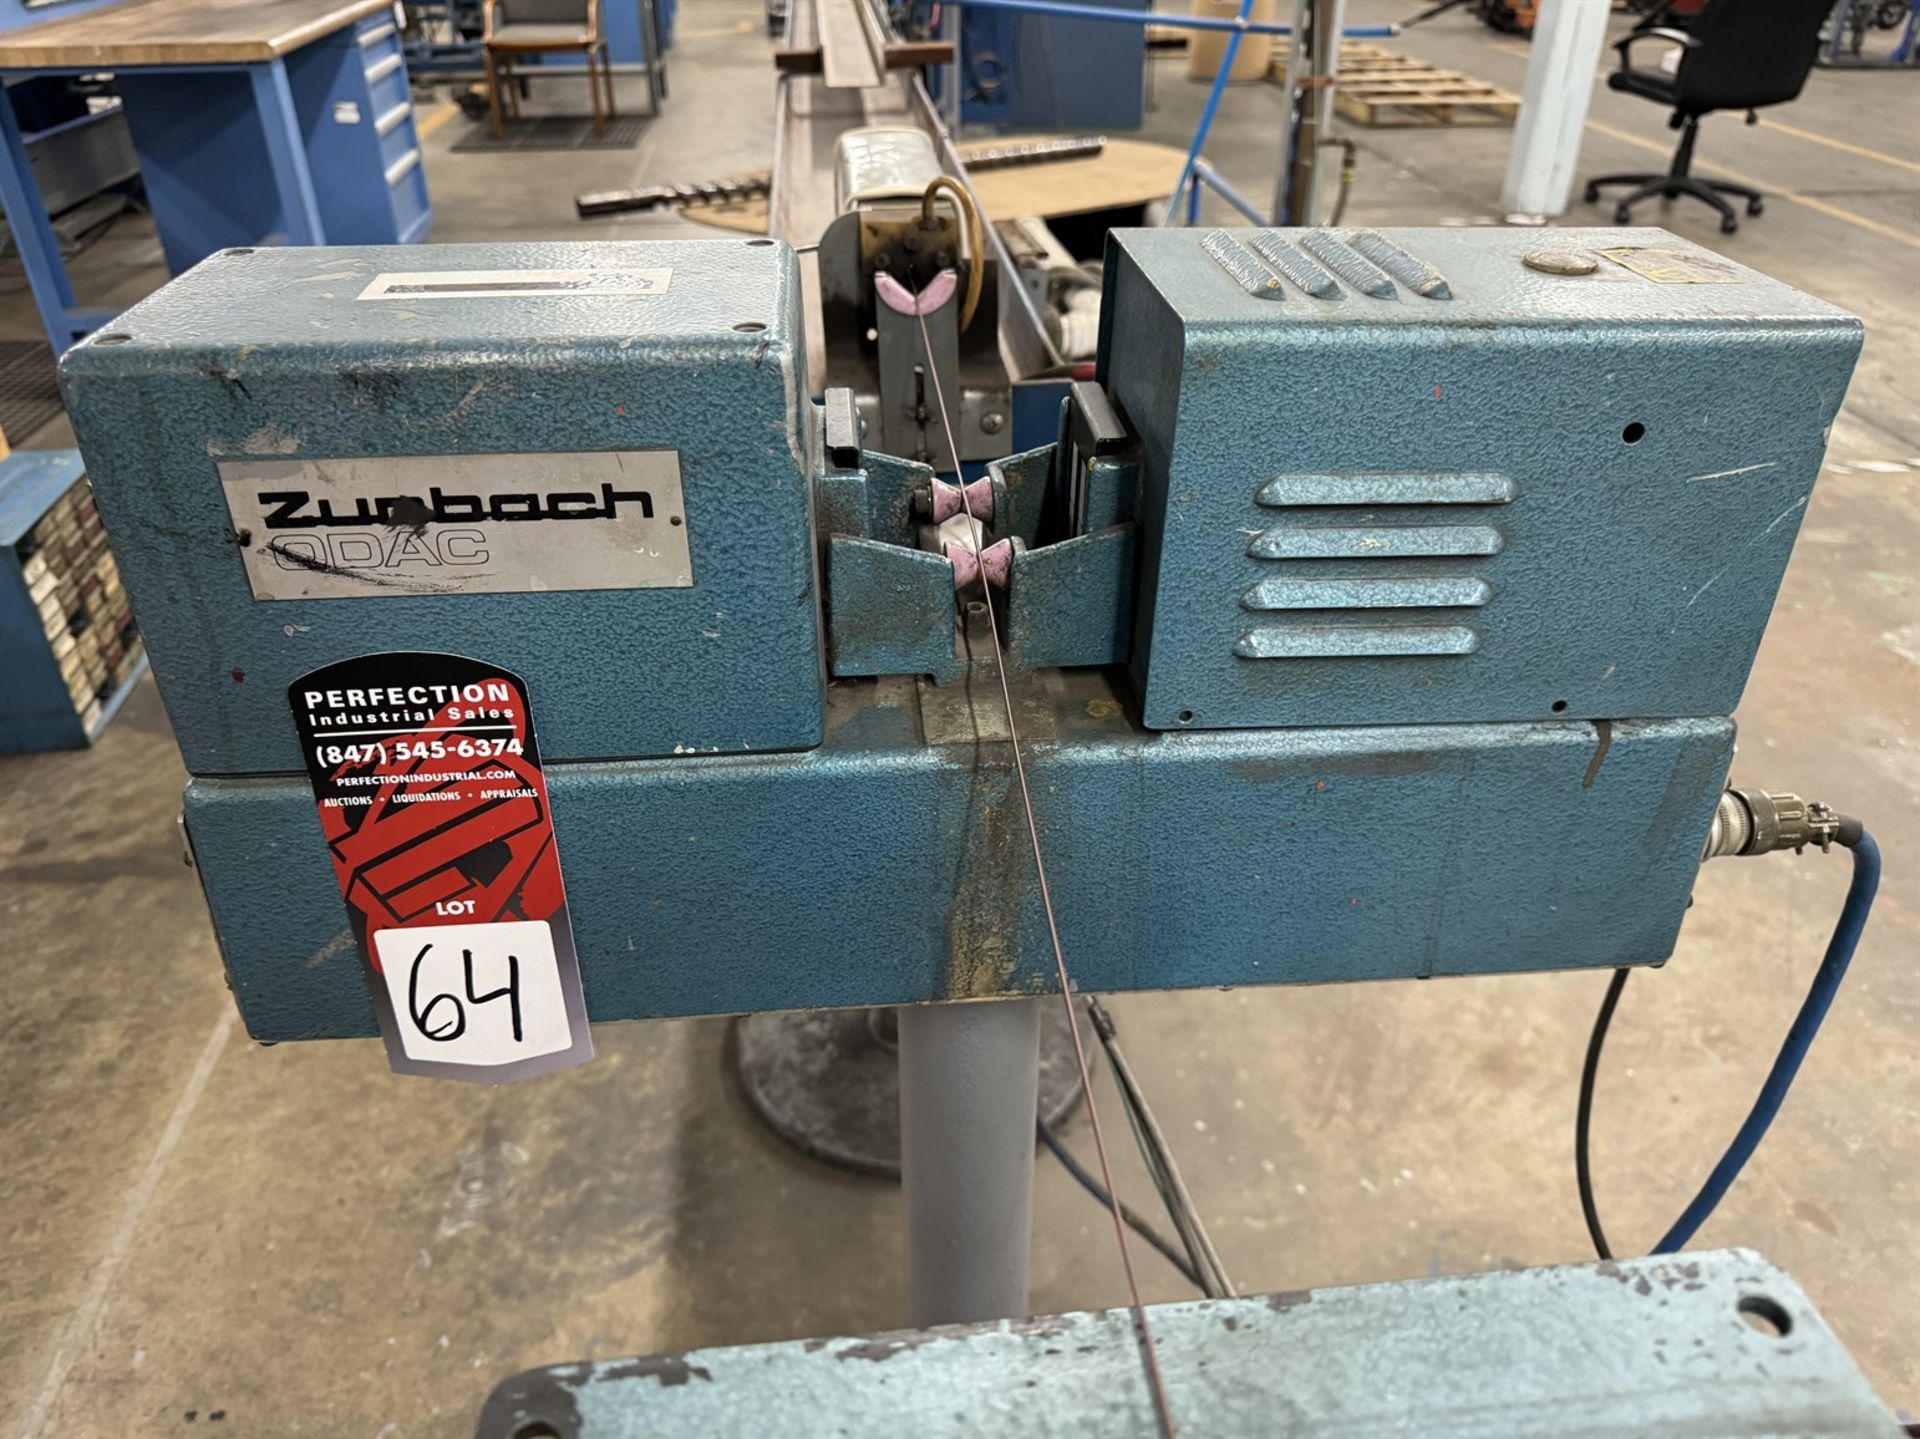 Insulation Extrusion Line (#1)-ZUMBACH ODAC P80 Controller w/Scanner Head - Image 3 of 6